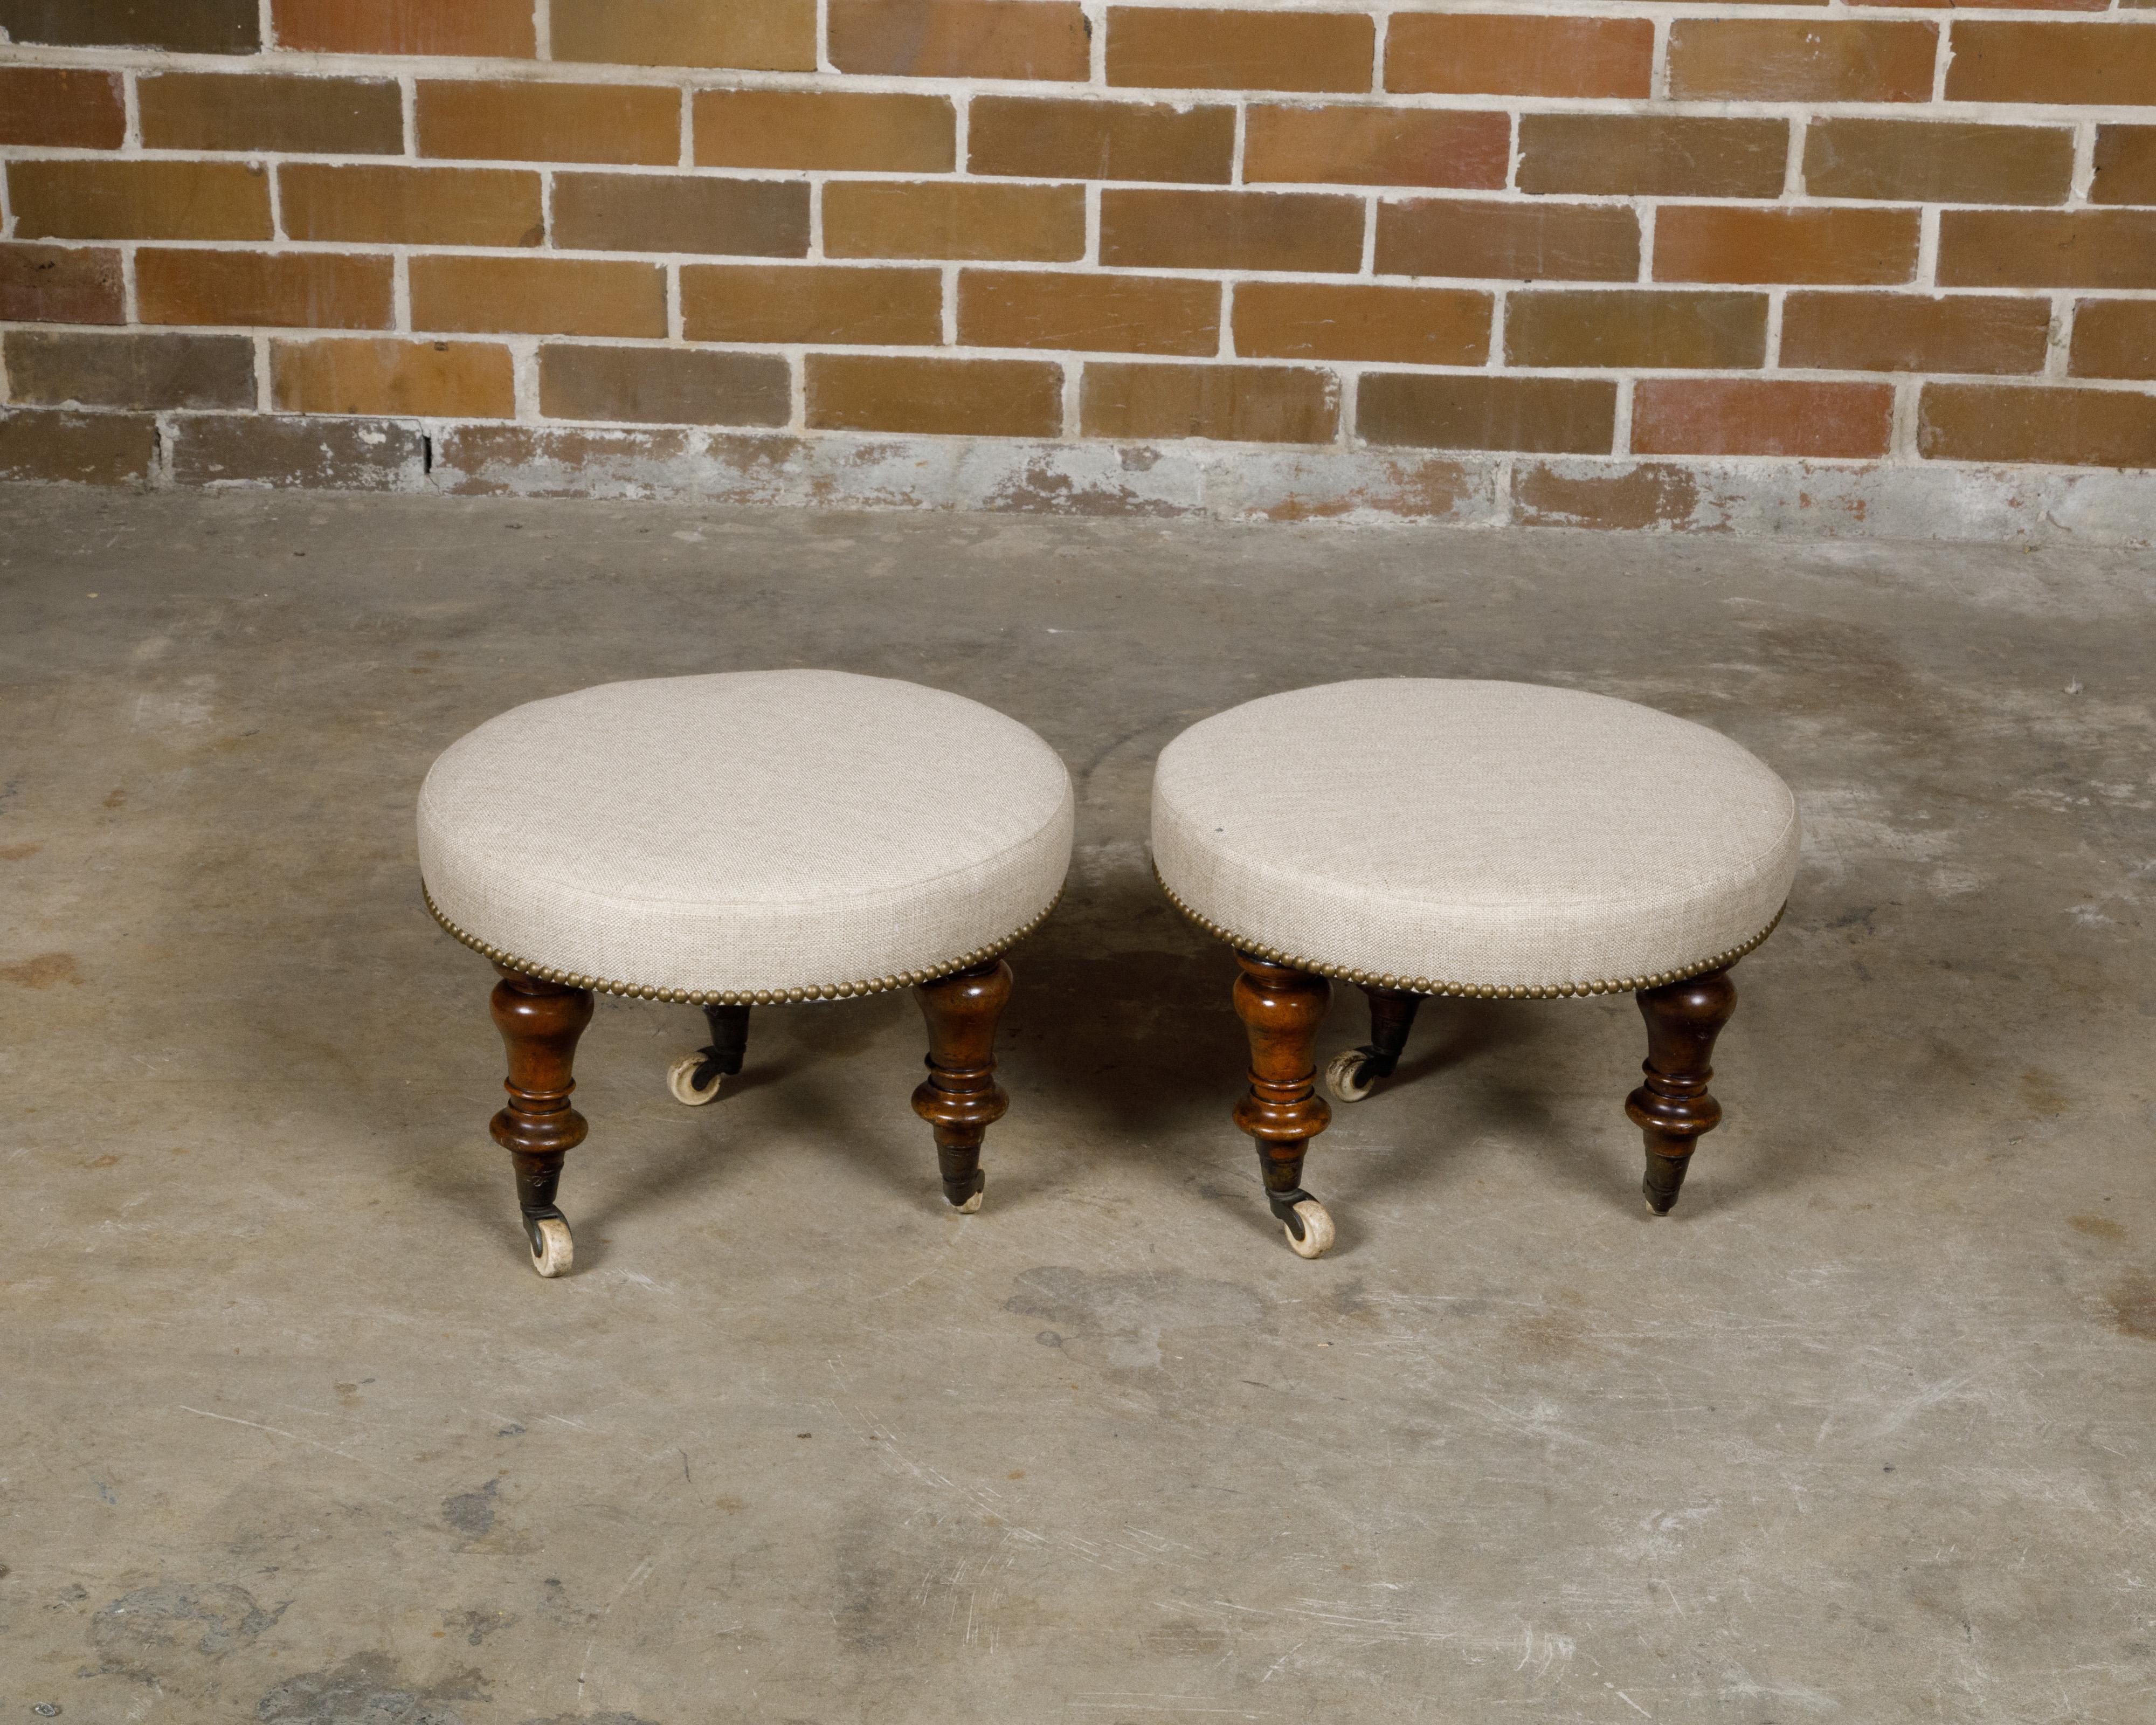 A pair of English mahogany stools from the 19th century with turned legs resting on casters and upholstered seats. This exquisite pair of English mahogany stools features elegantly turned legs sourced from chairs crafted in the 19th century, resting